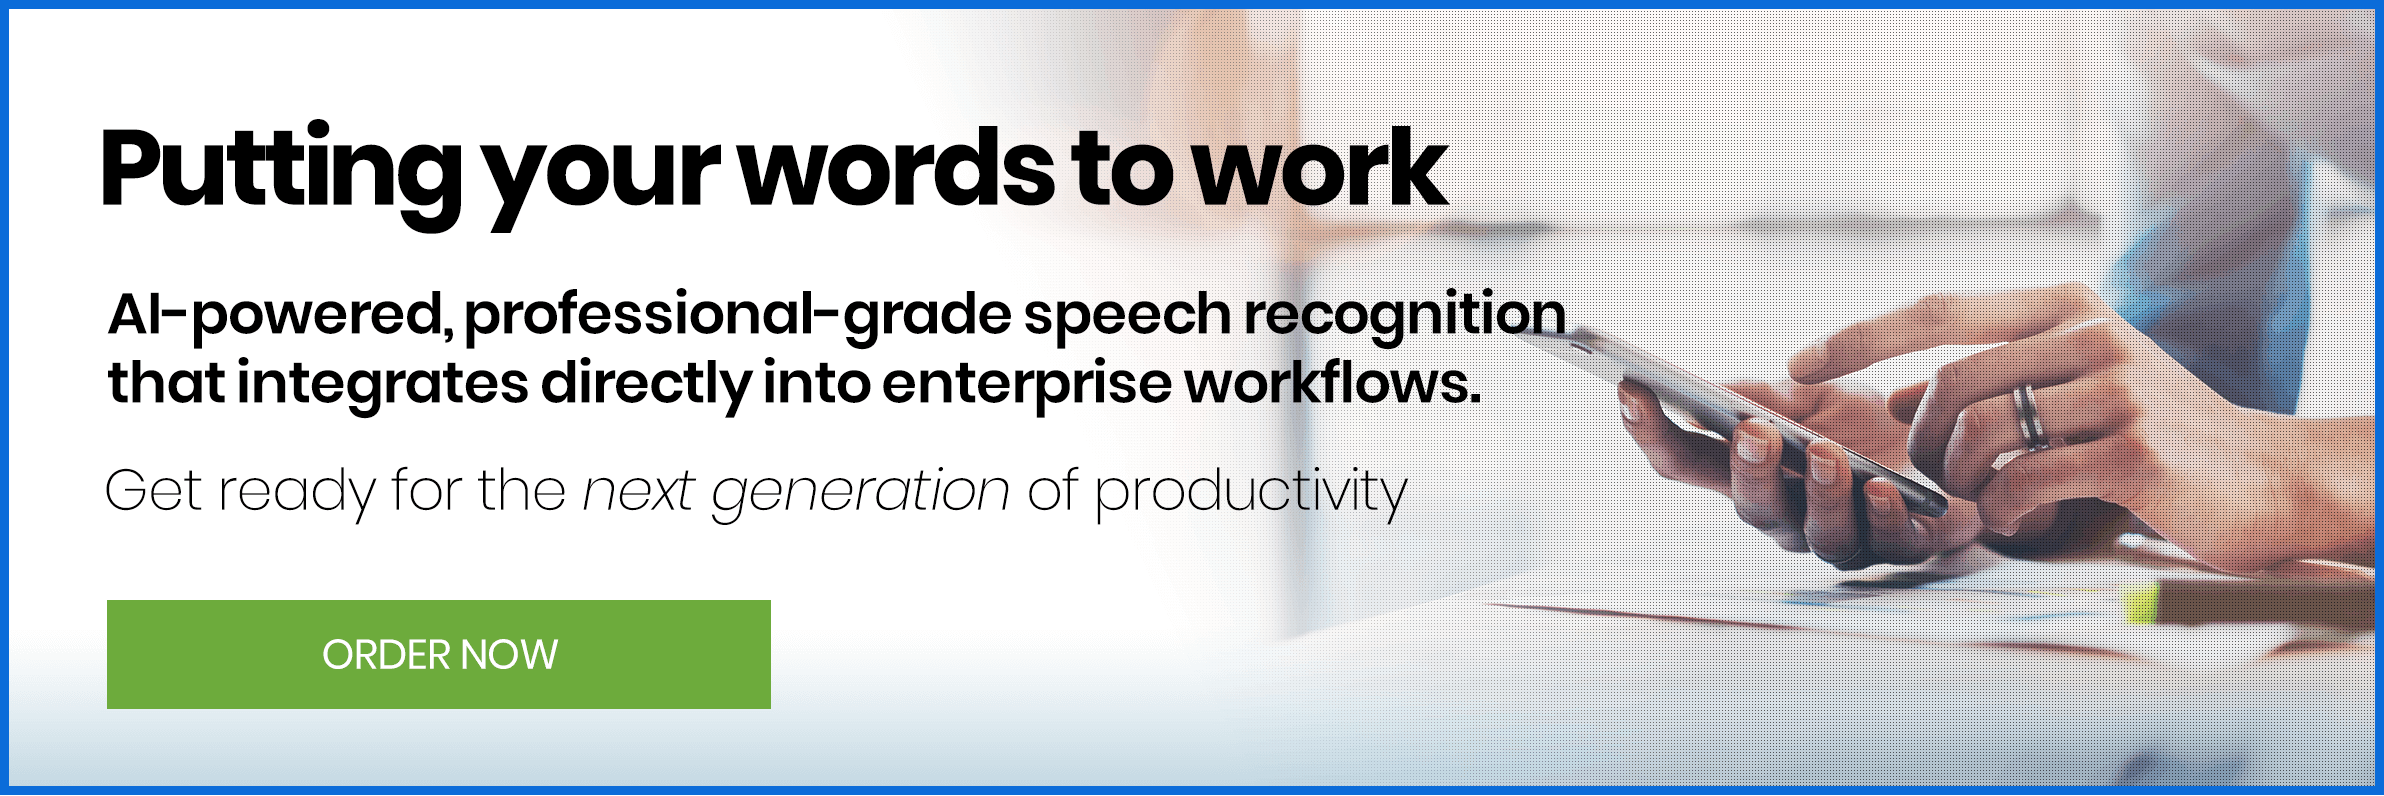 Putting your words to work. AI-powered, professional-grade speech recognitionthat integrates directly into enterprise workflows.